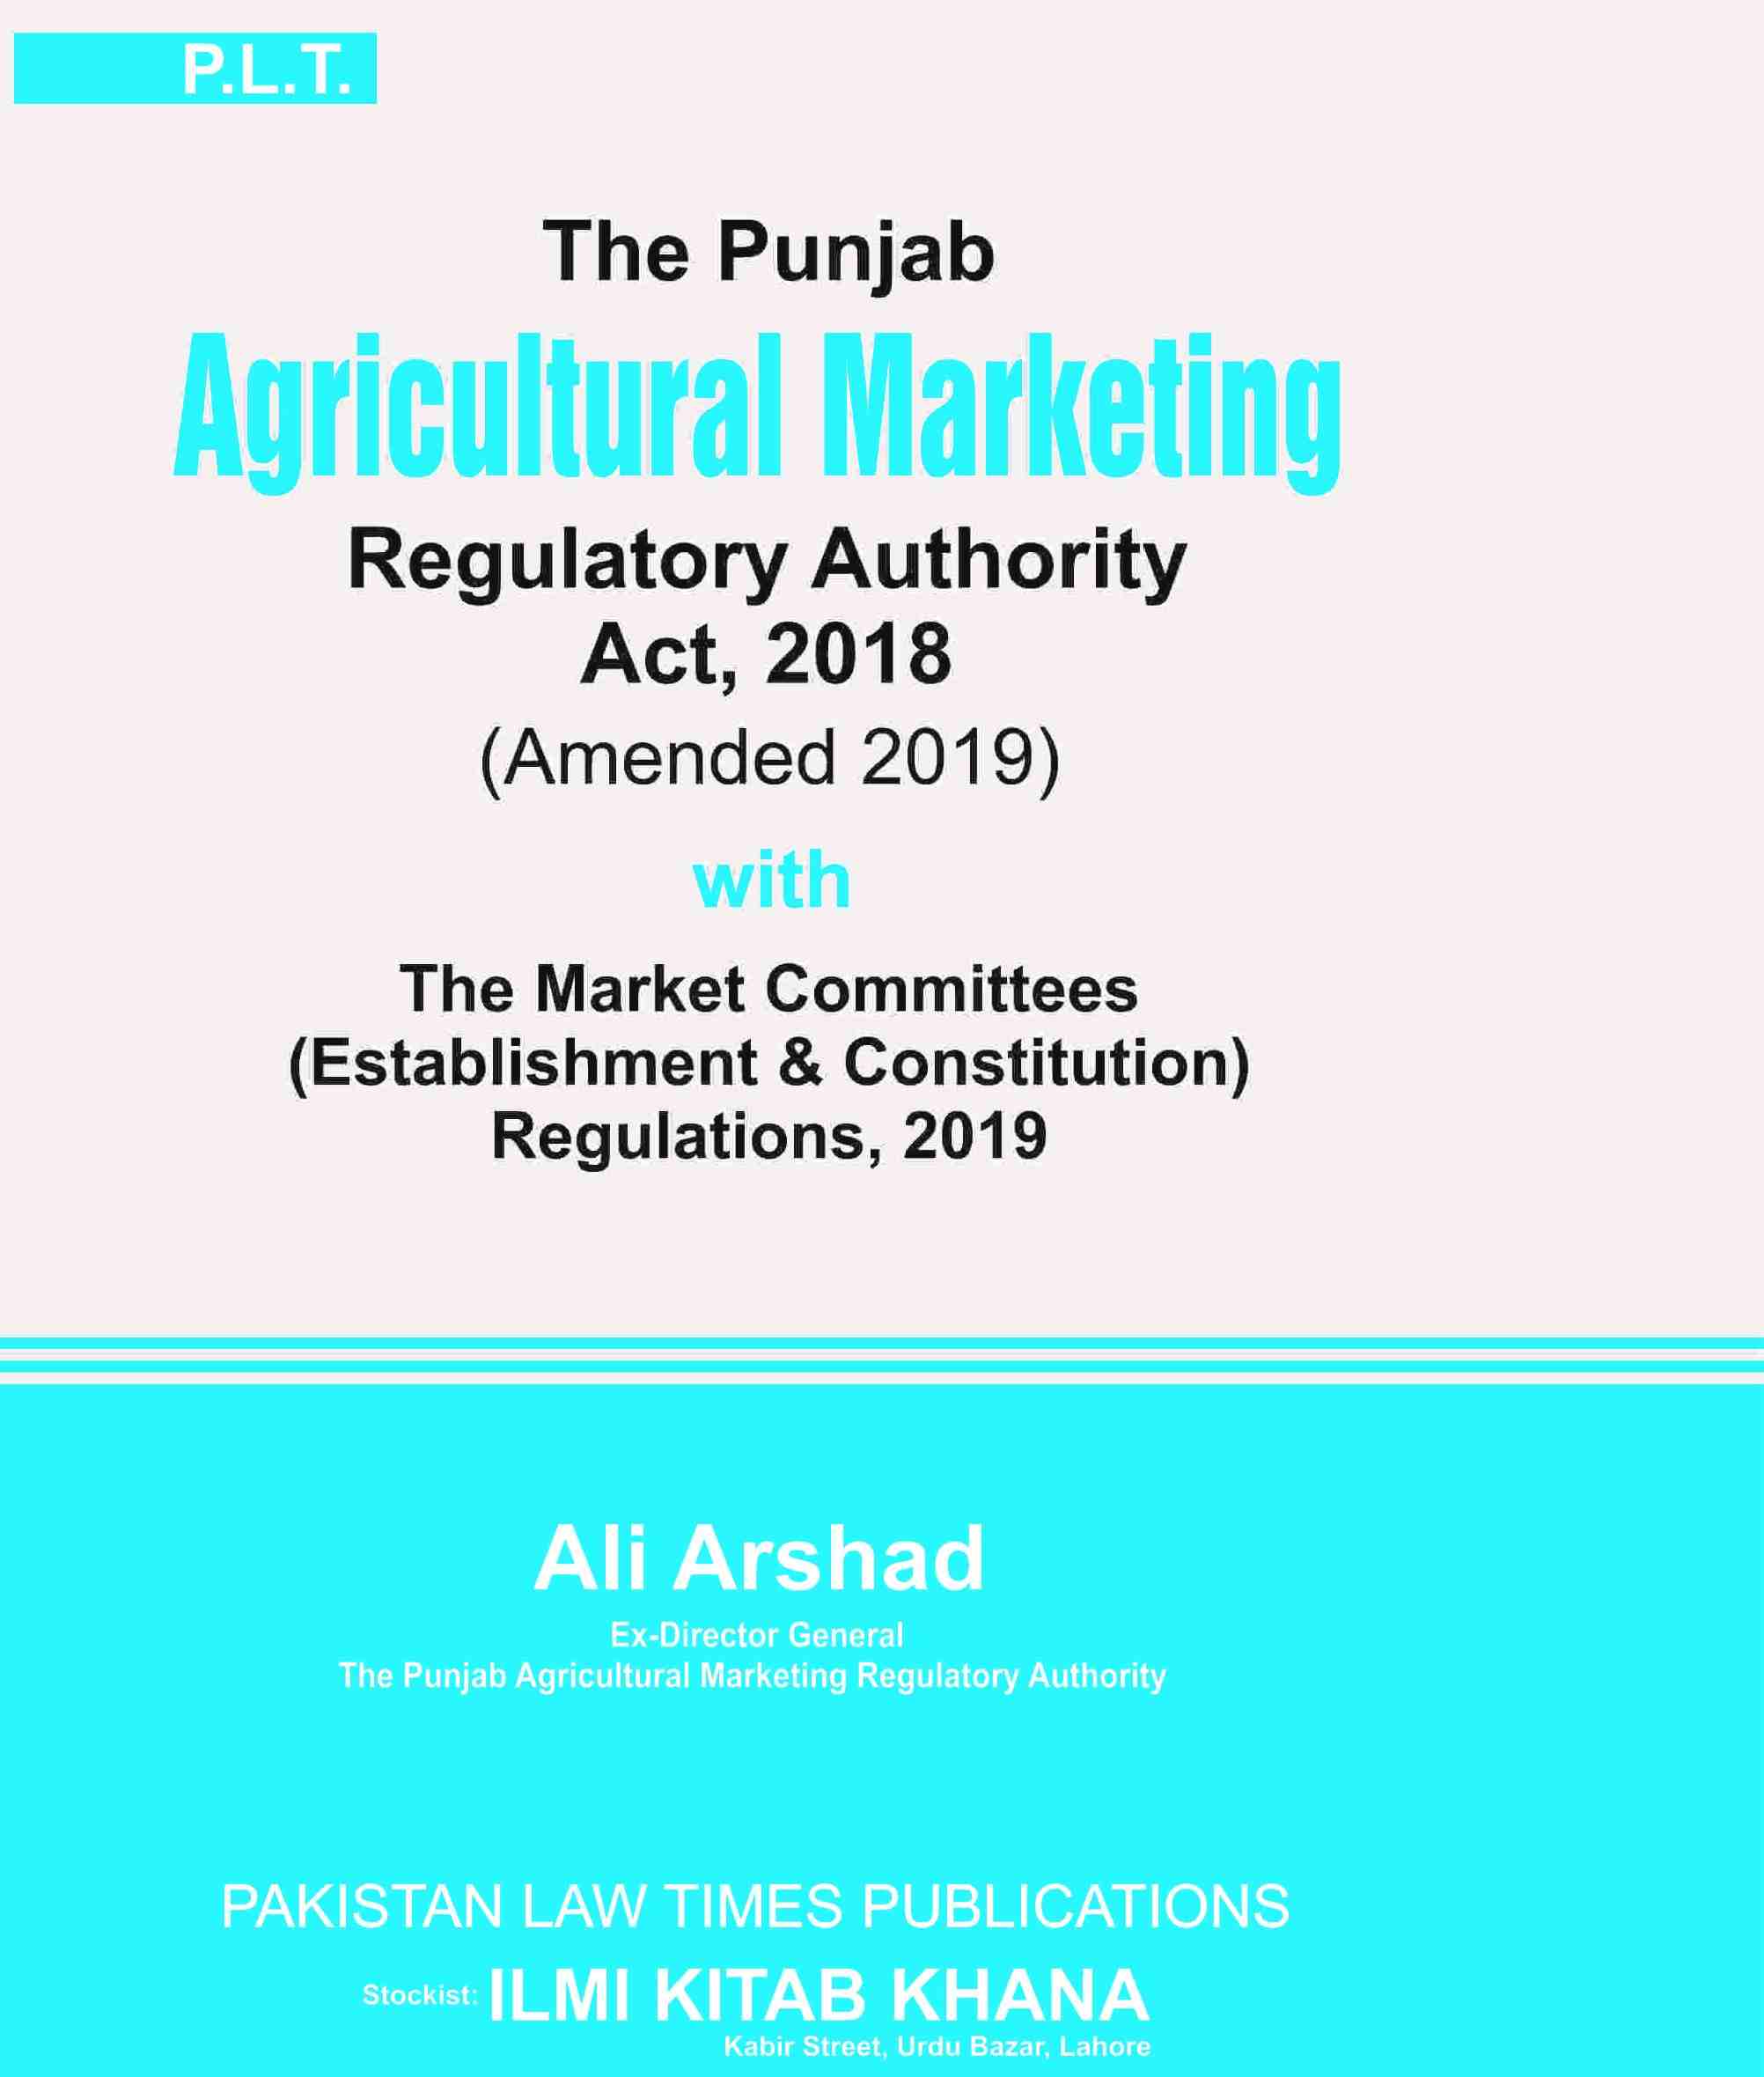 The Punjab Agriculture Marketing Act